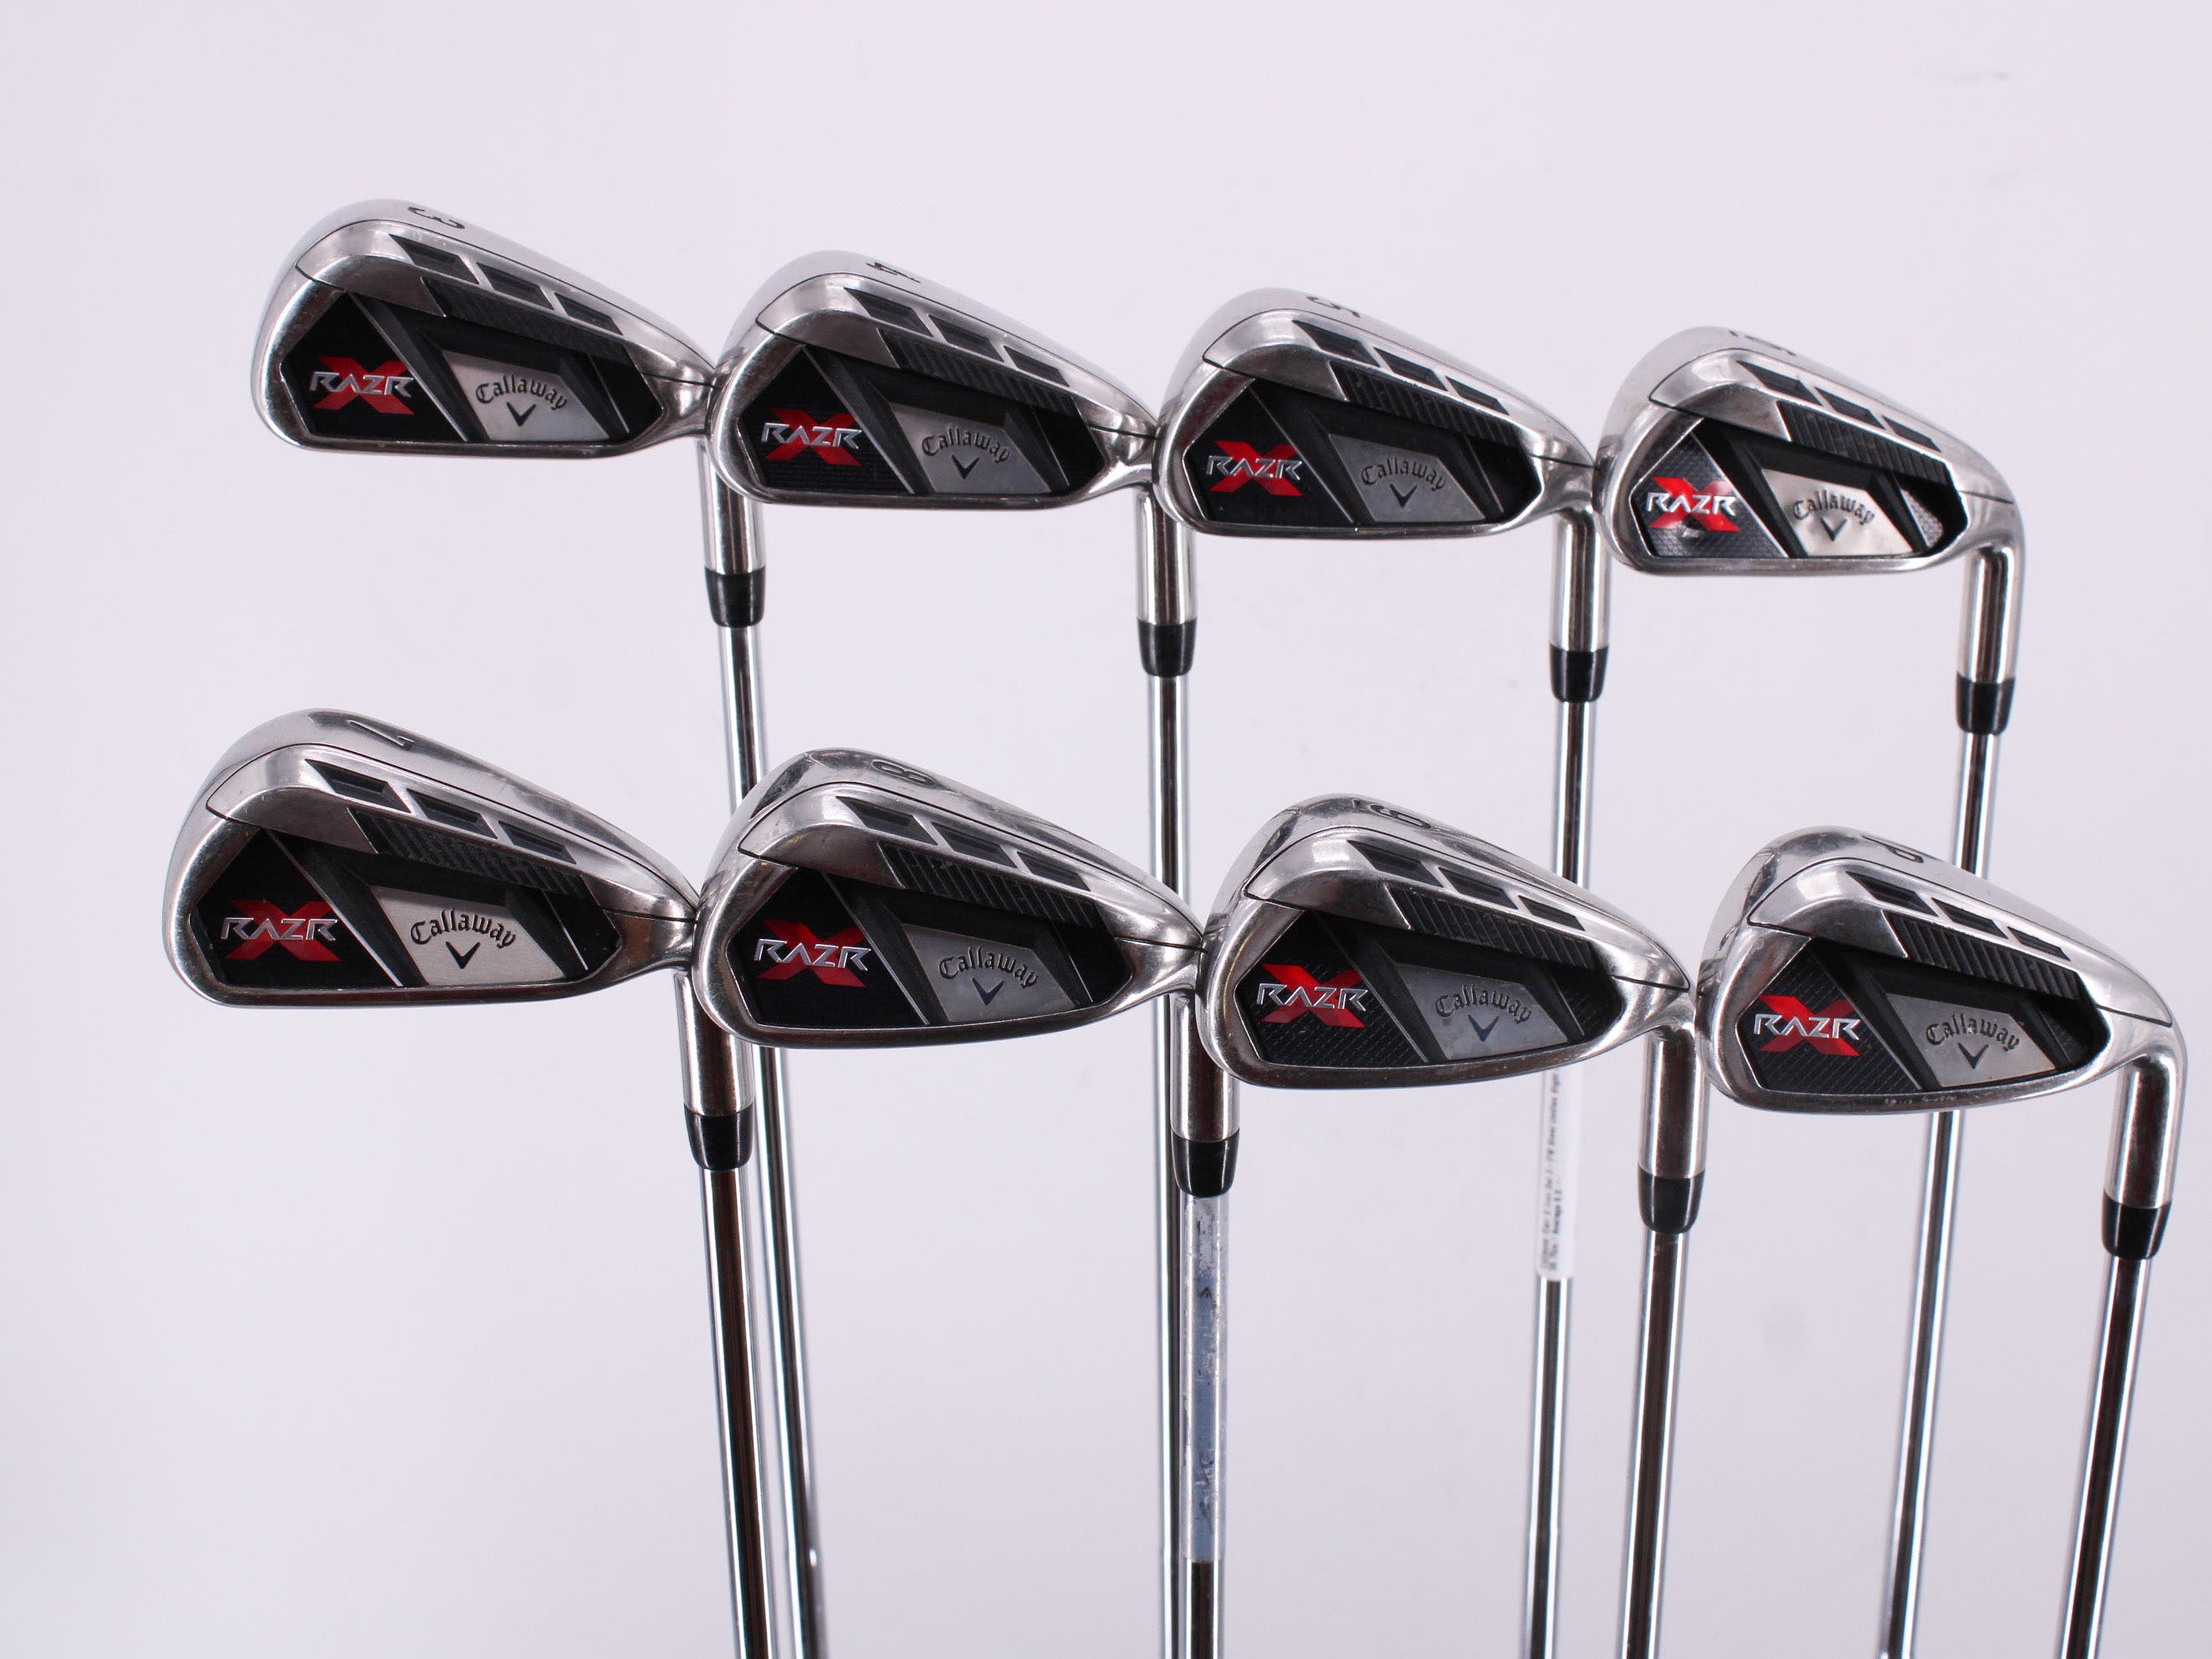 Flex S Callaway RAZR X FORGED 6S NSPRO 950GH S Mens Right Iron Set 